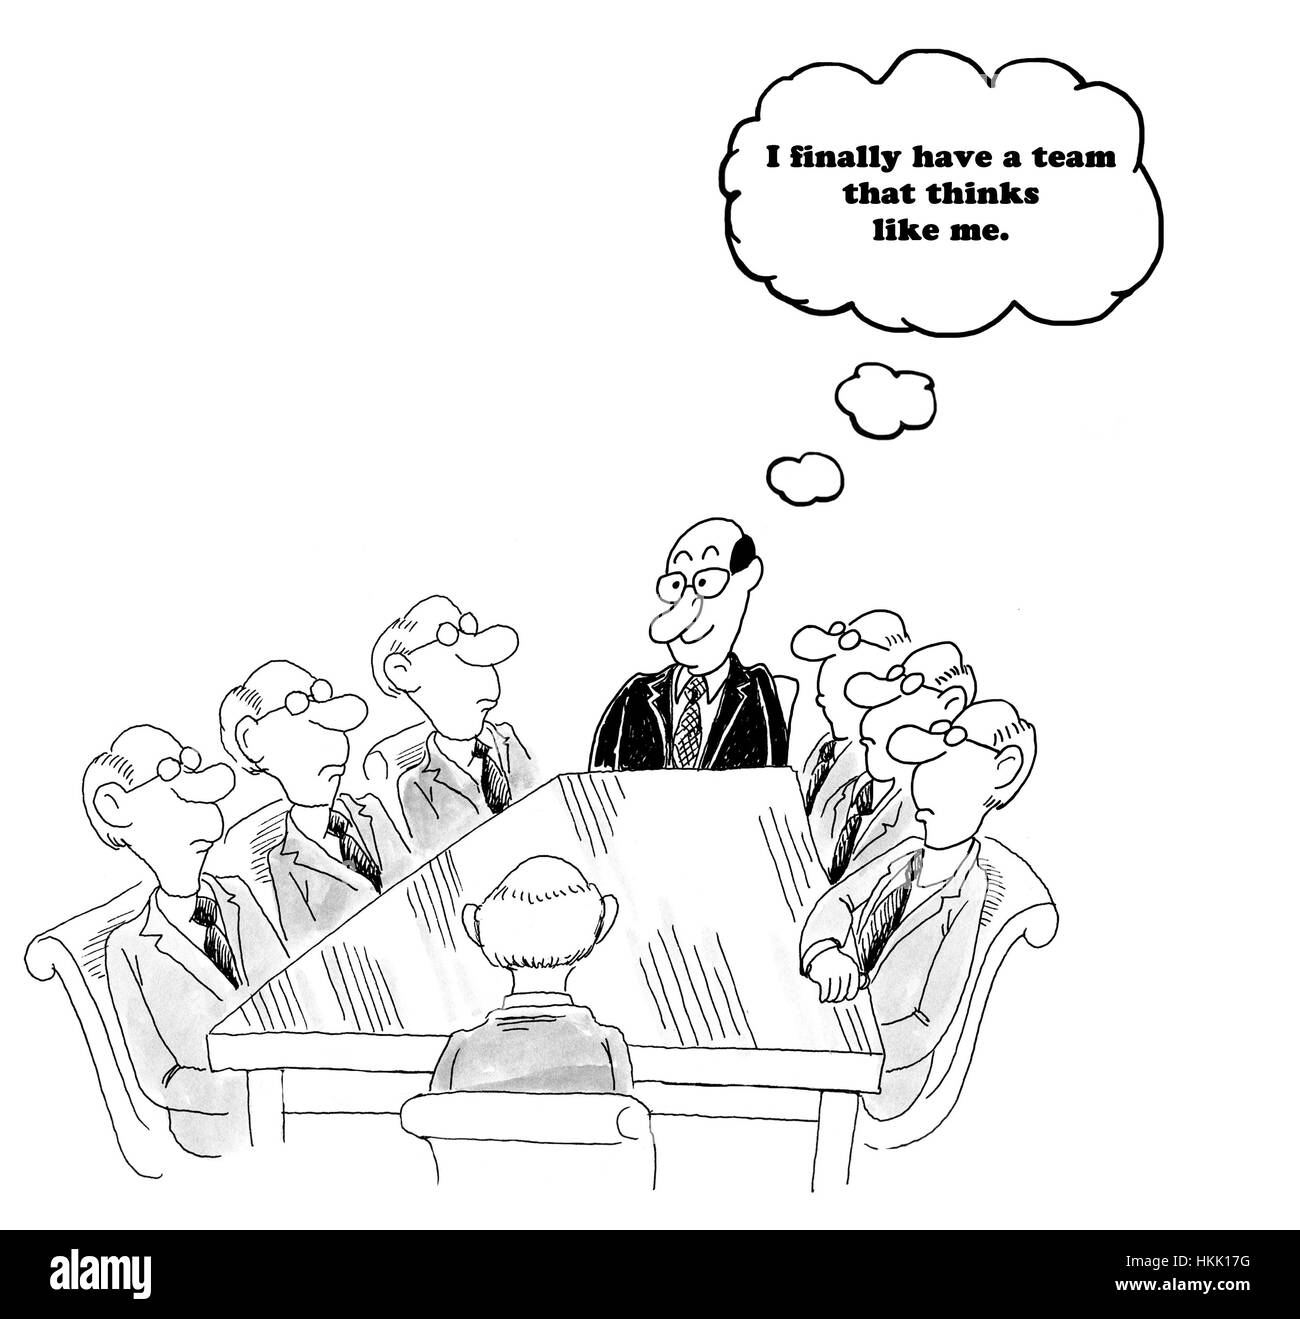 Business cartoon about a team leader happy that the team members think exactly like he does. Stock Photo